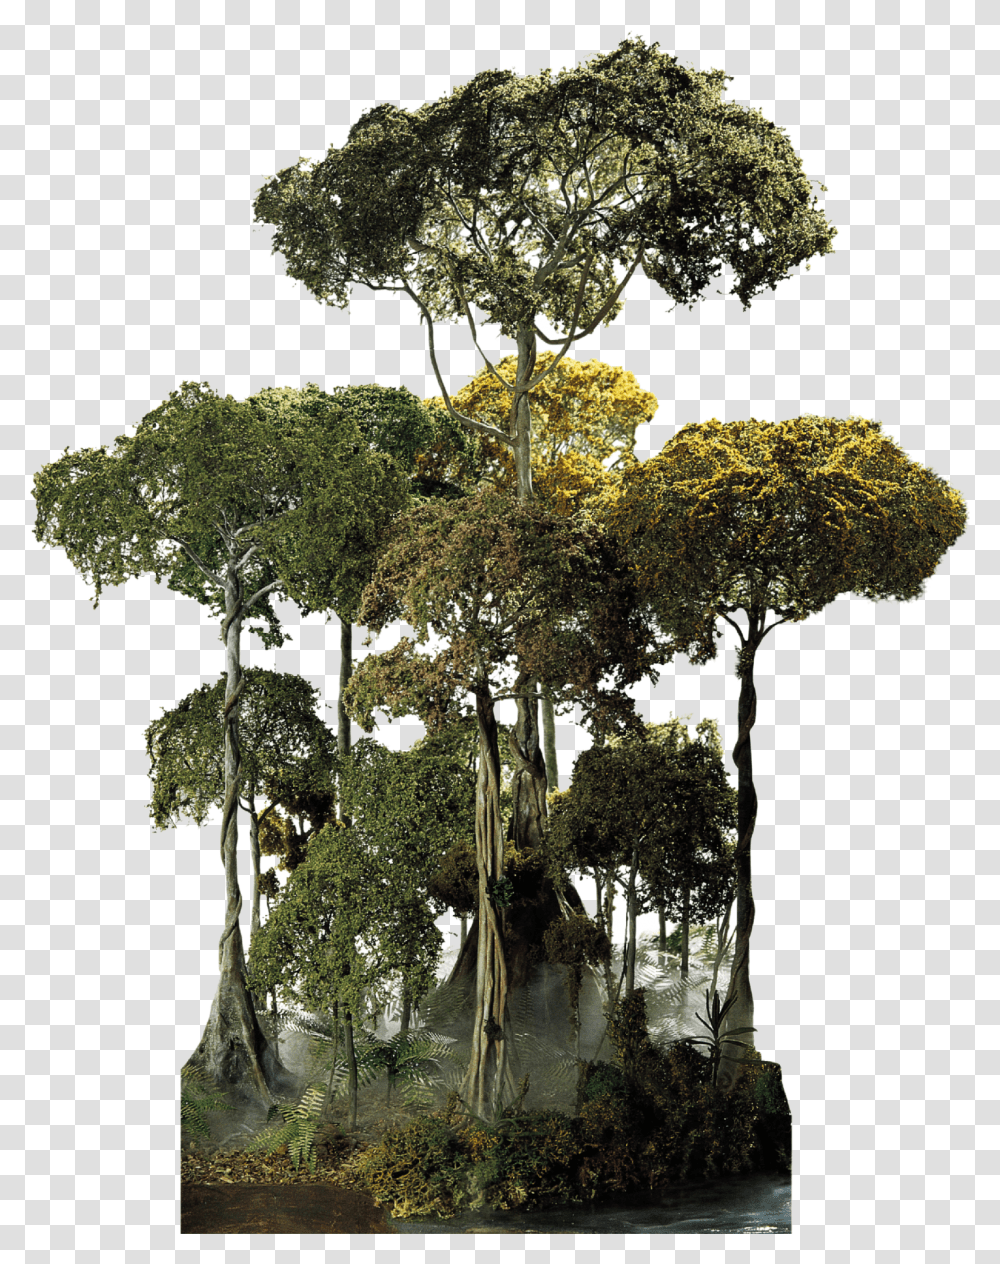 B Waterfall In Tropical Forest Tropical Forest Tree, Plant, Cross, Mineral, Outdoors Transparent Png